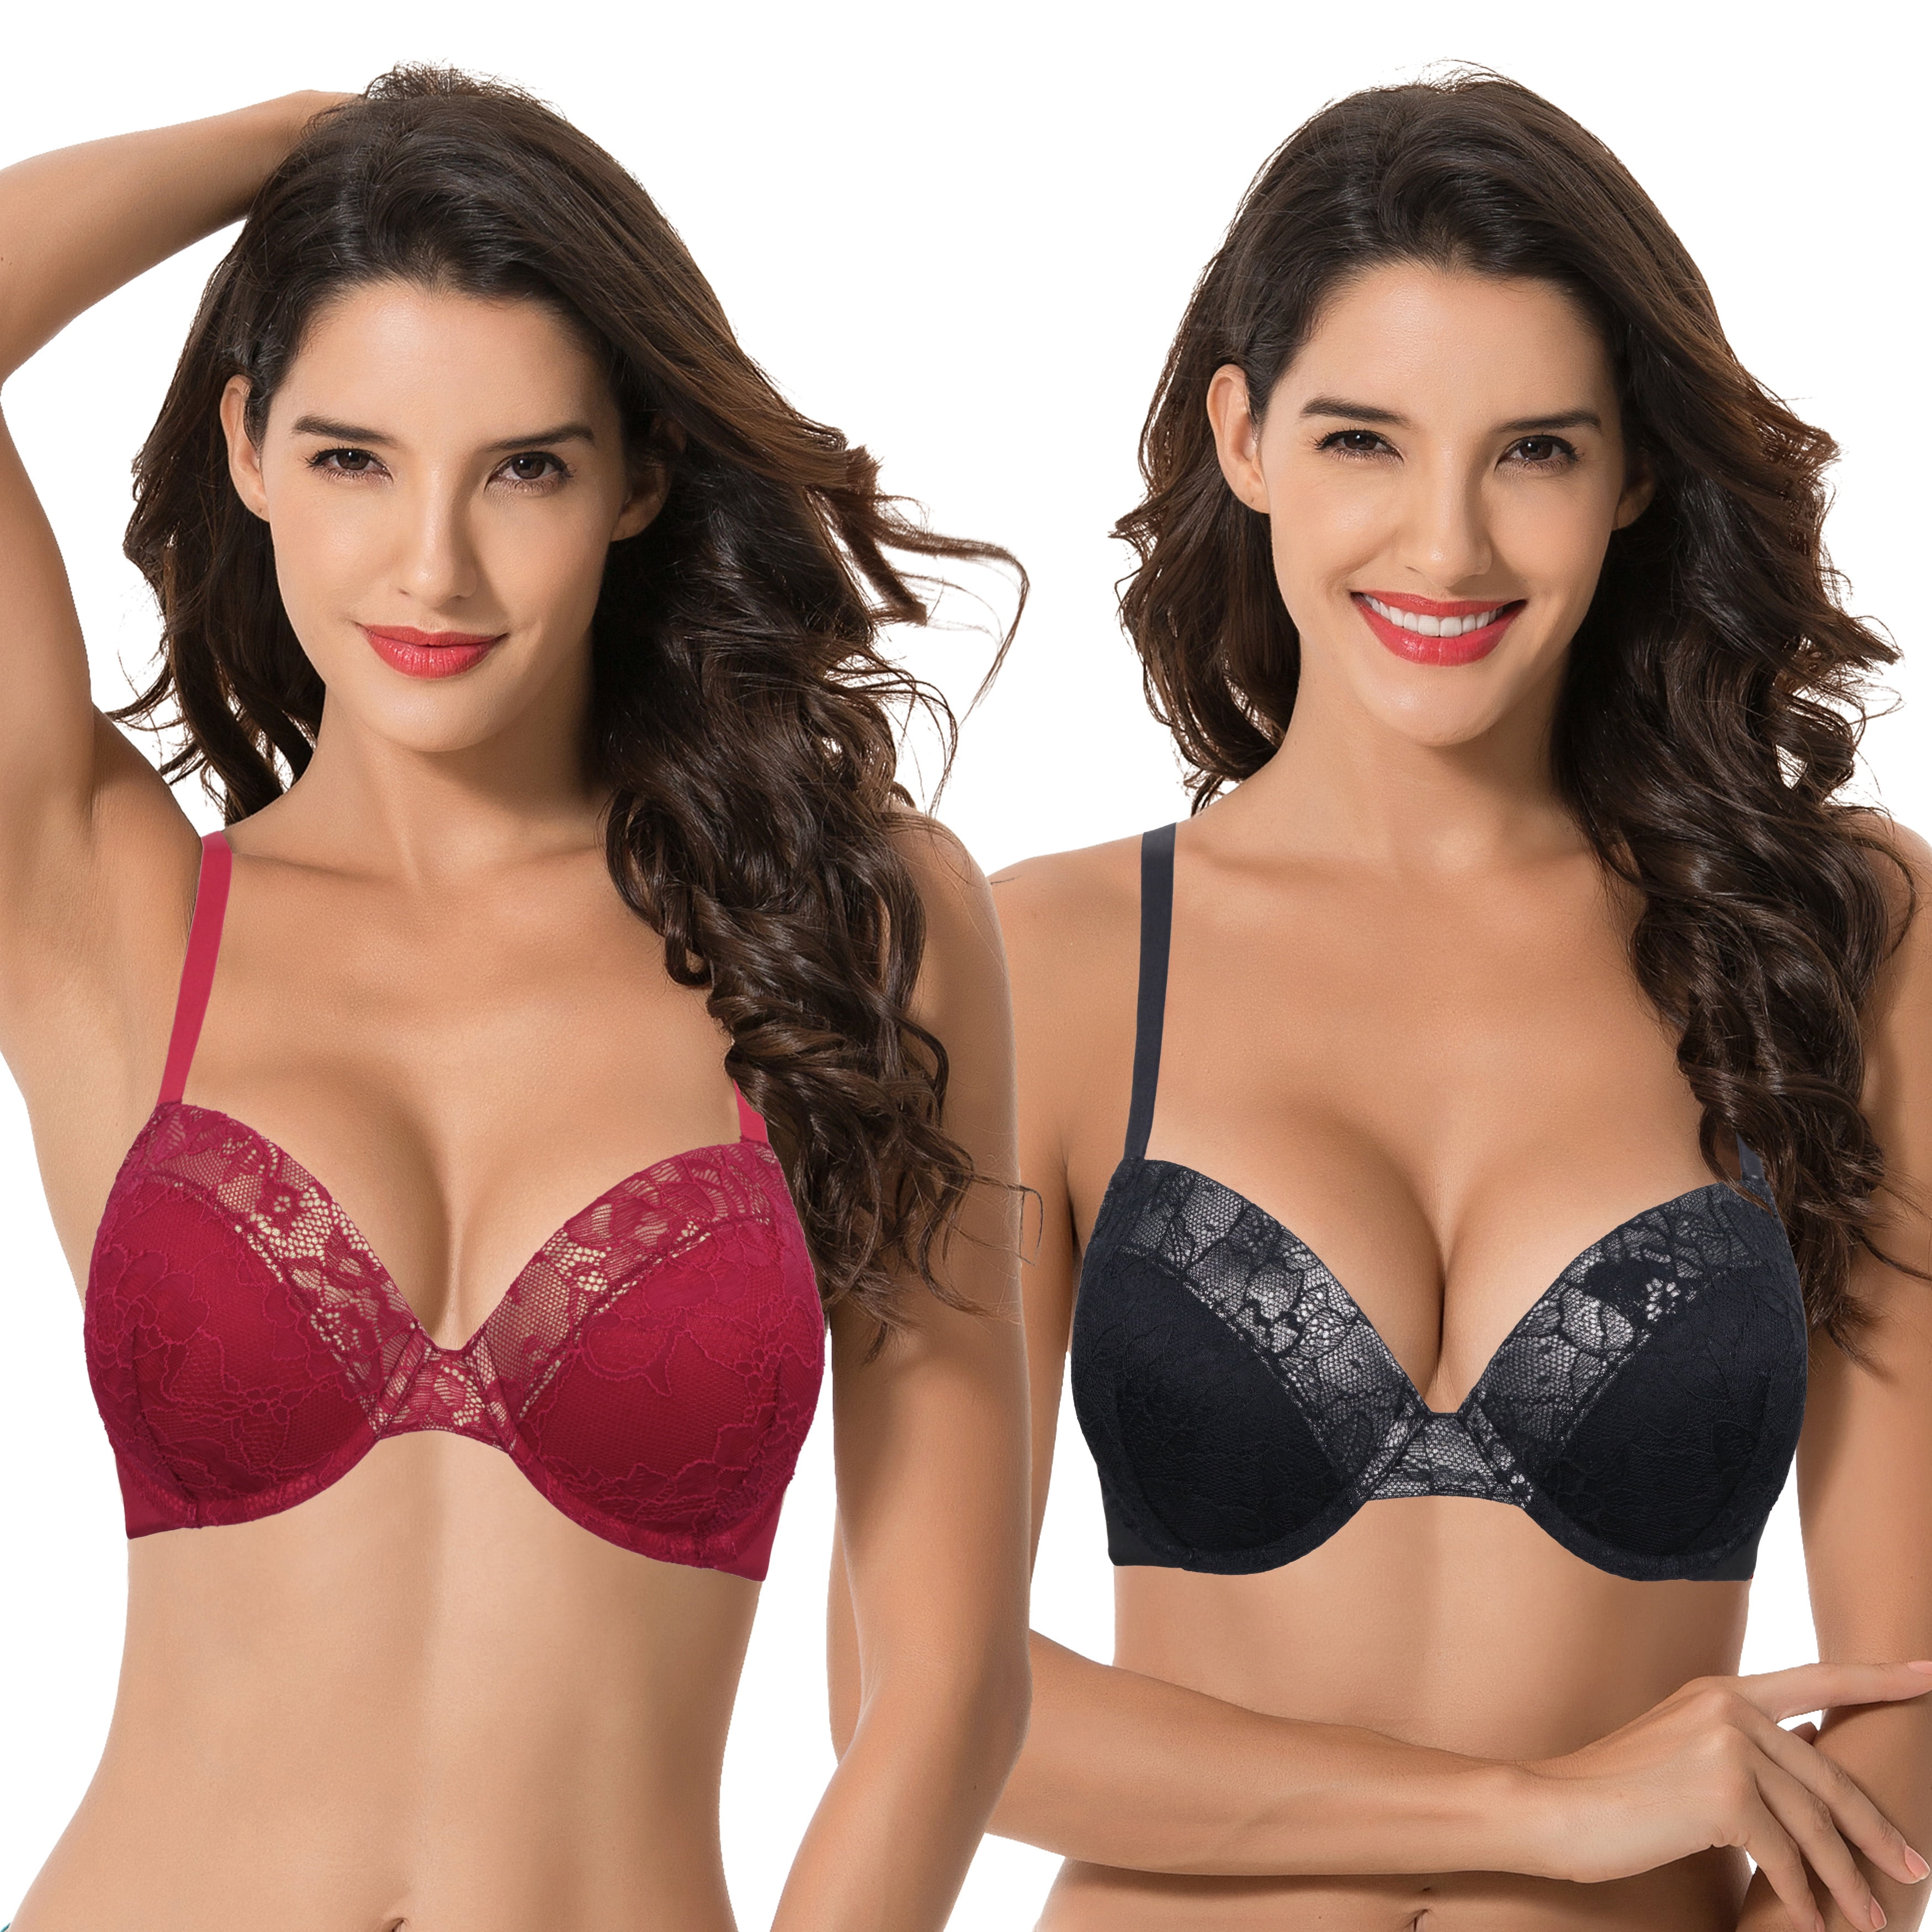 Curve Muse Women's Plus Size Push Up Add 1 Cup Underwire Perfect Shape Lace  Bras-2Pk-Black/Red,Powder Silver-40D 